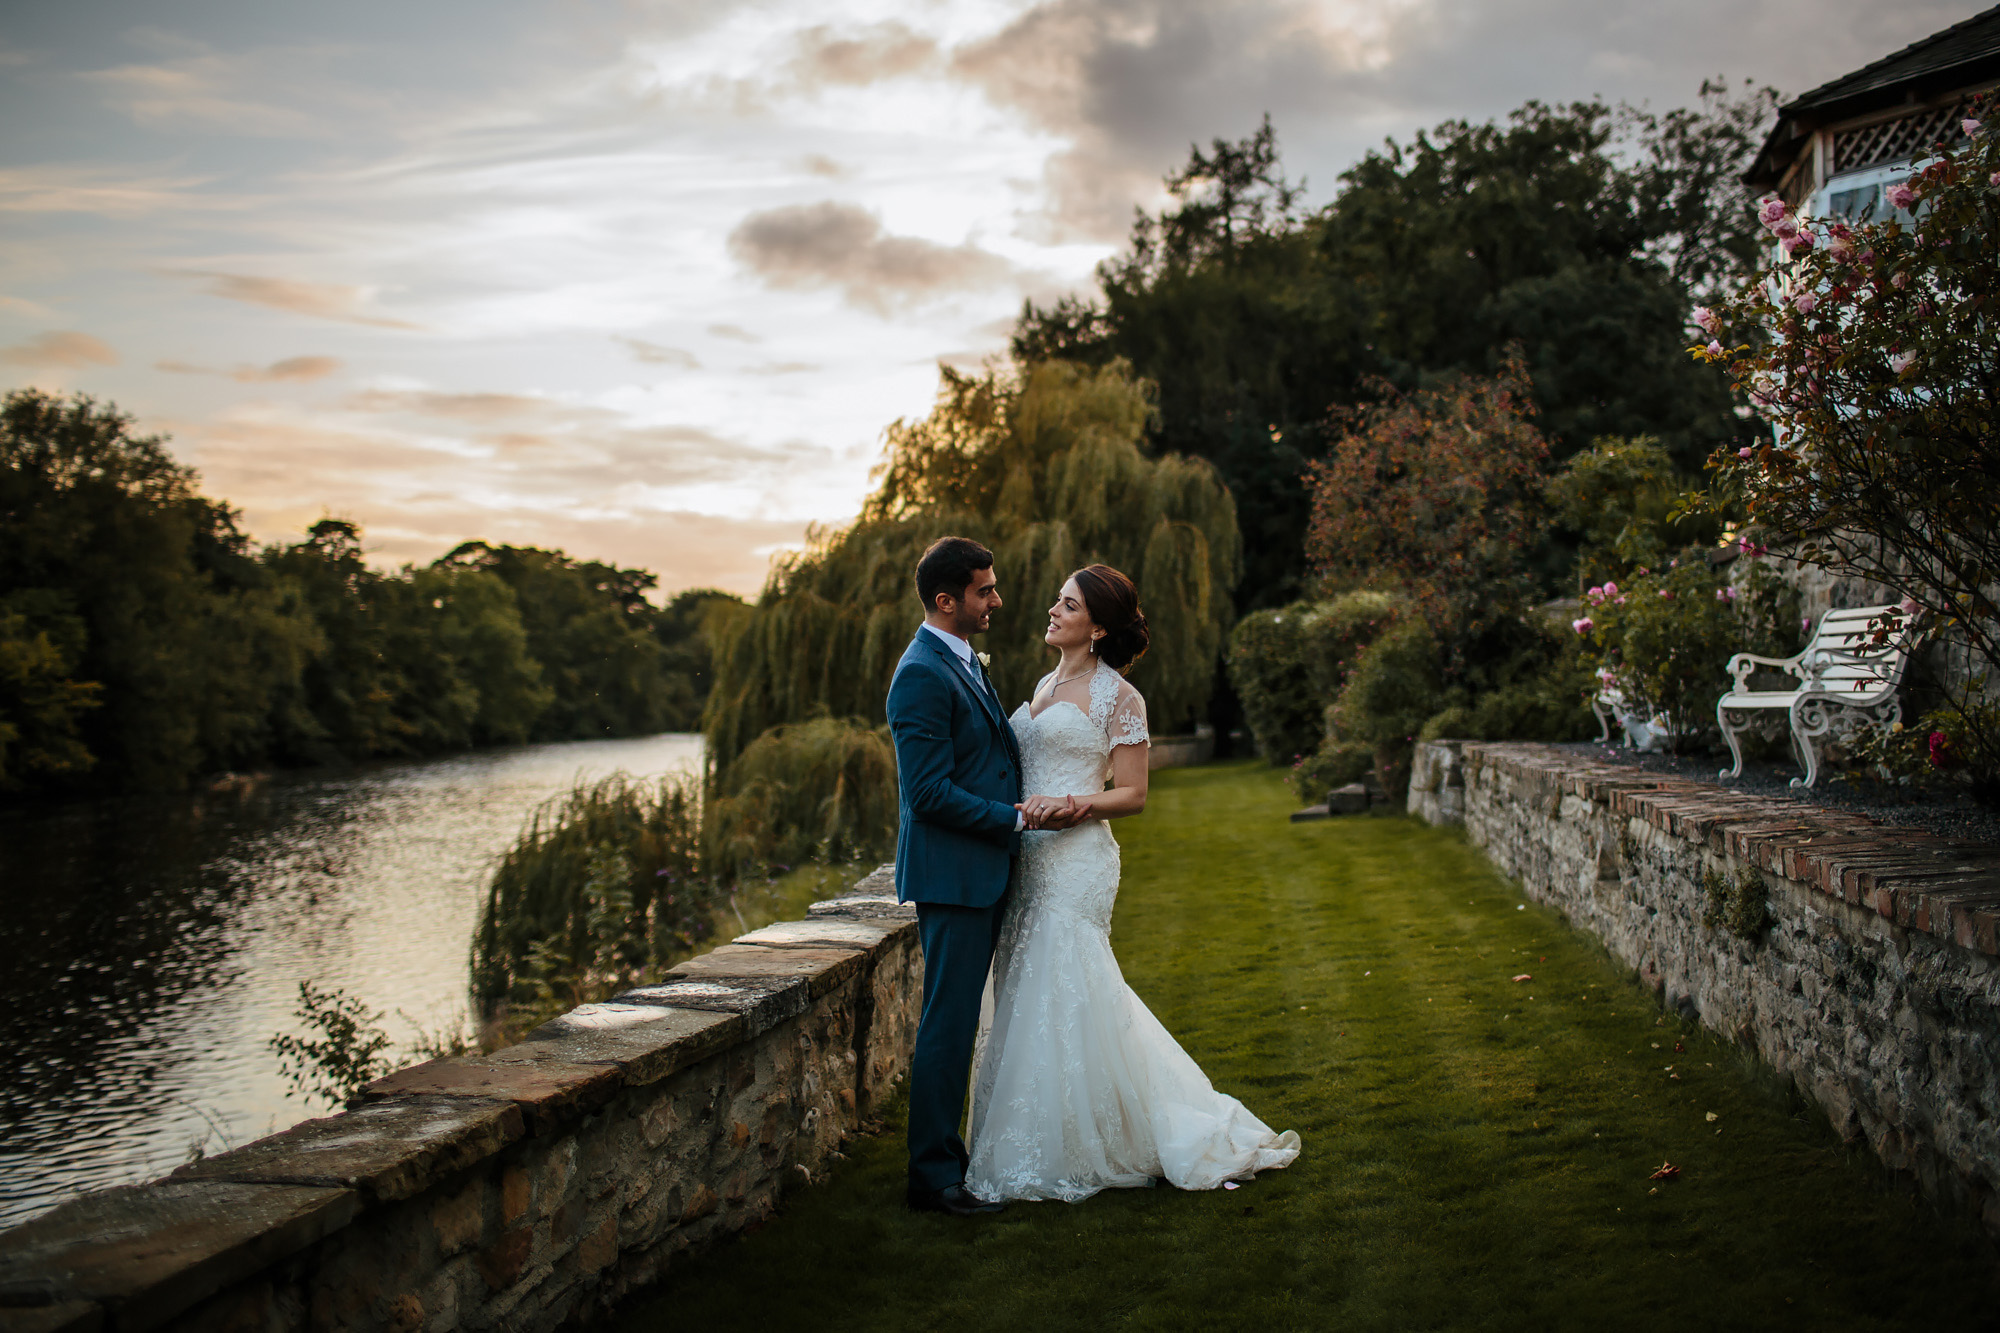 Sunset wedding portrait by a Yorkshire river